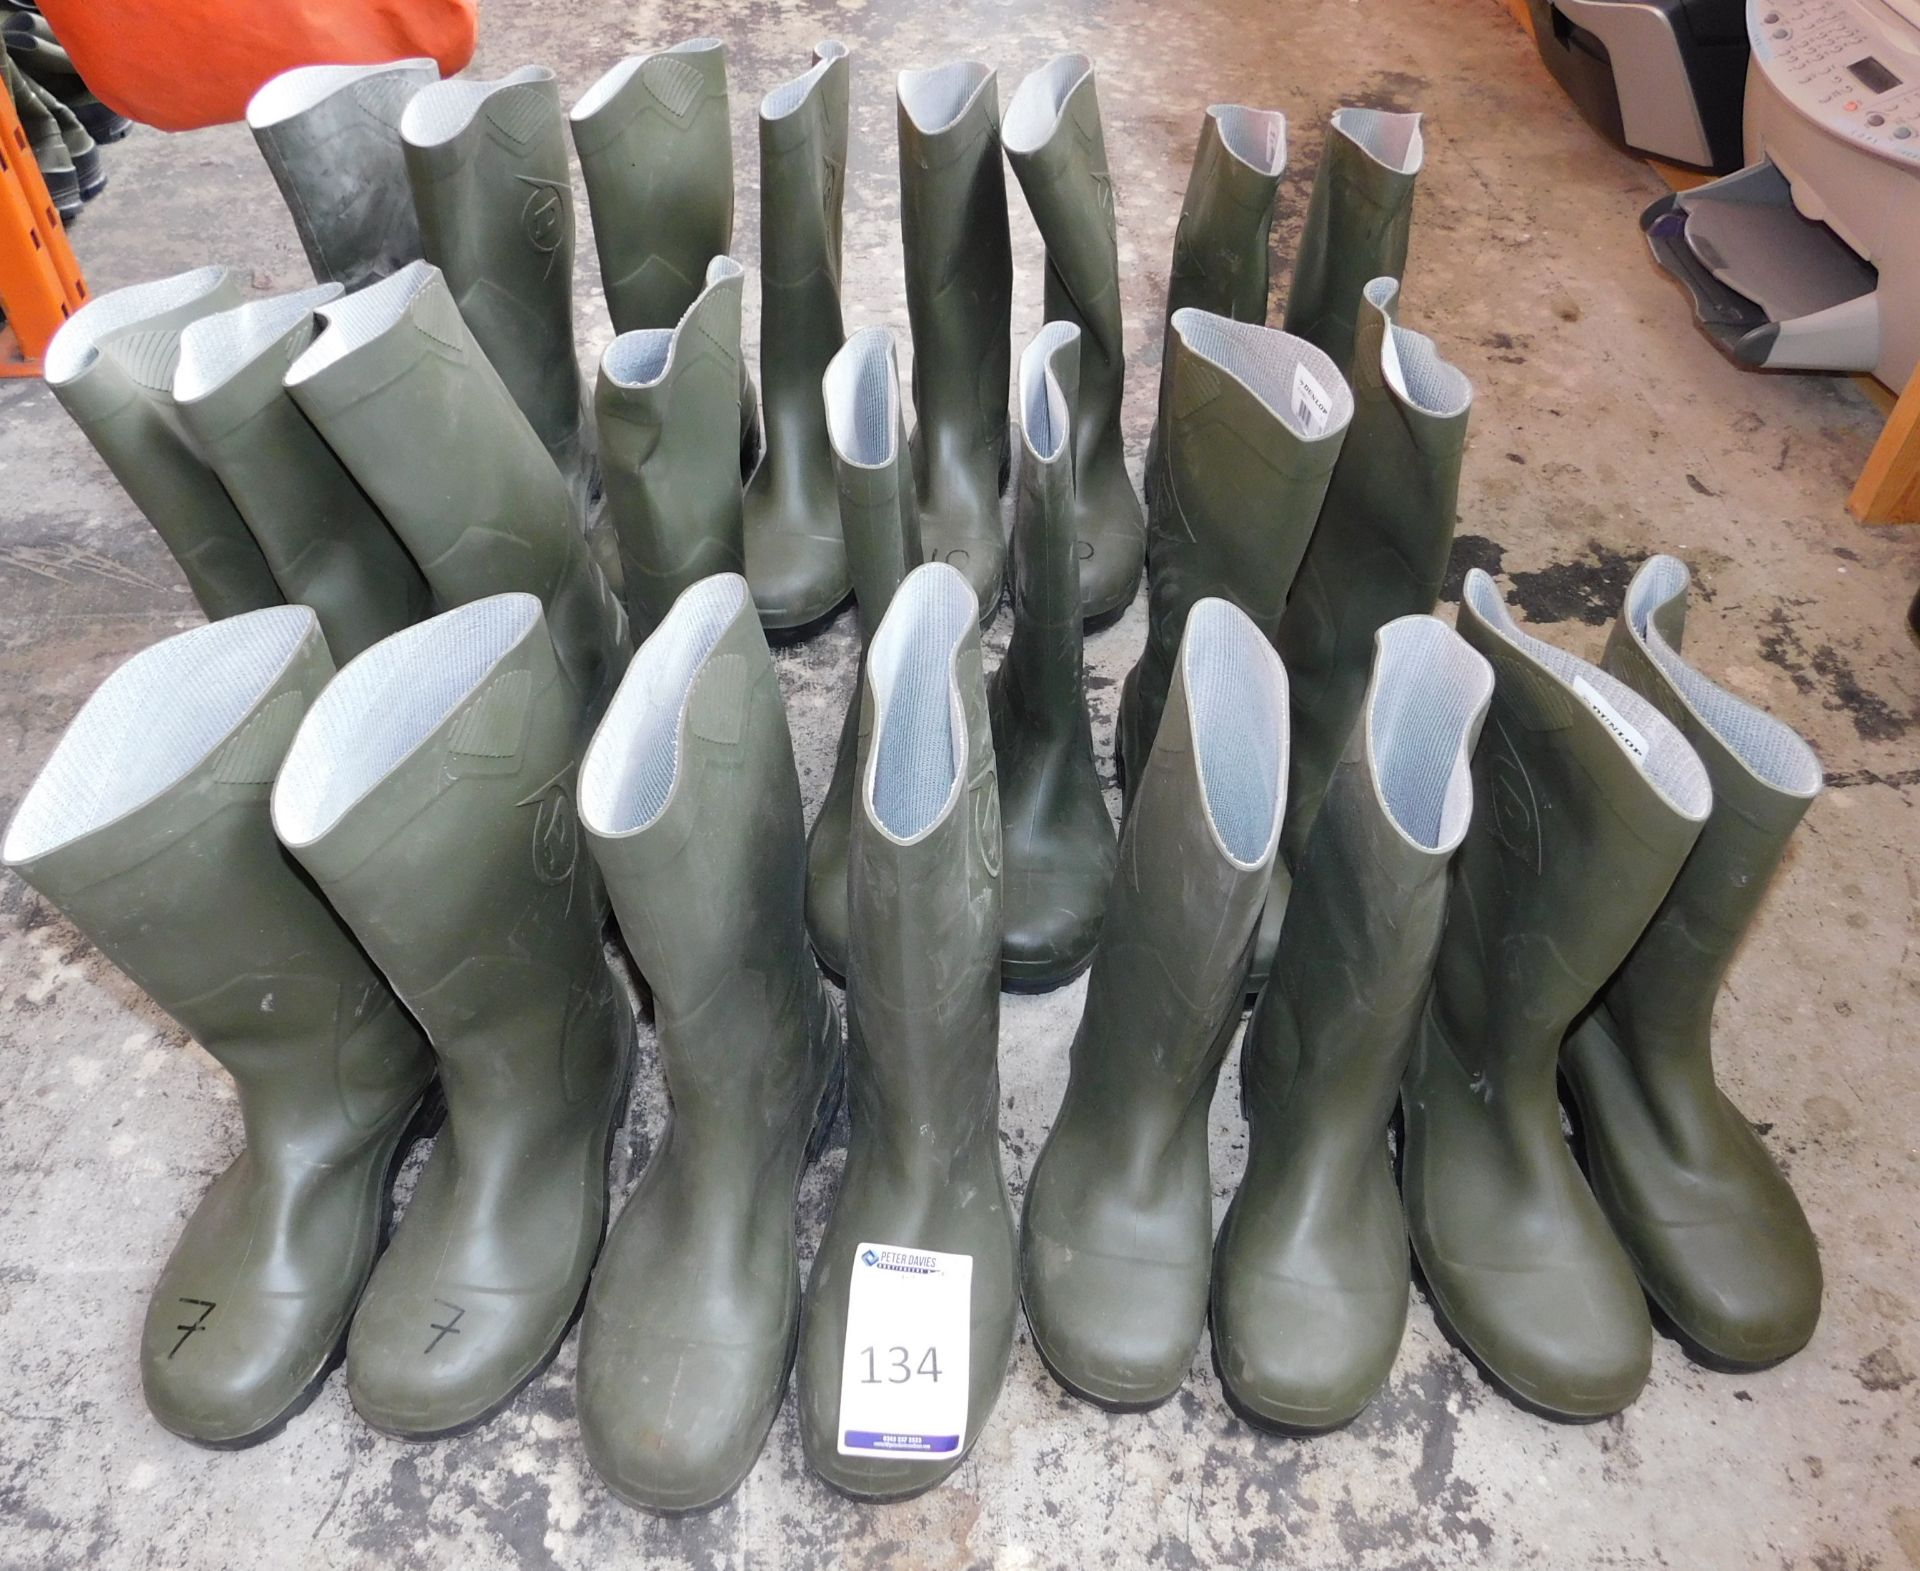 12 Pairs of Dunlop Steel Toe Capped Wellington Boots (Various Sizes)